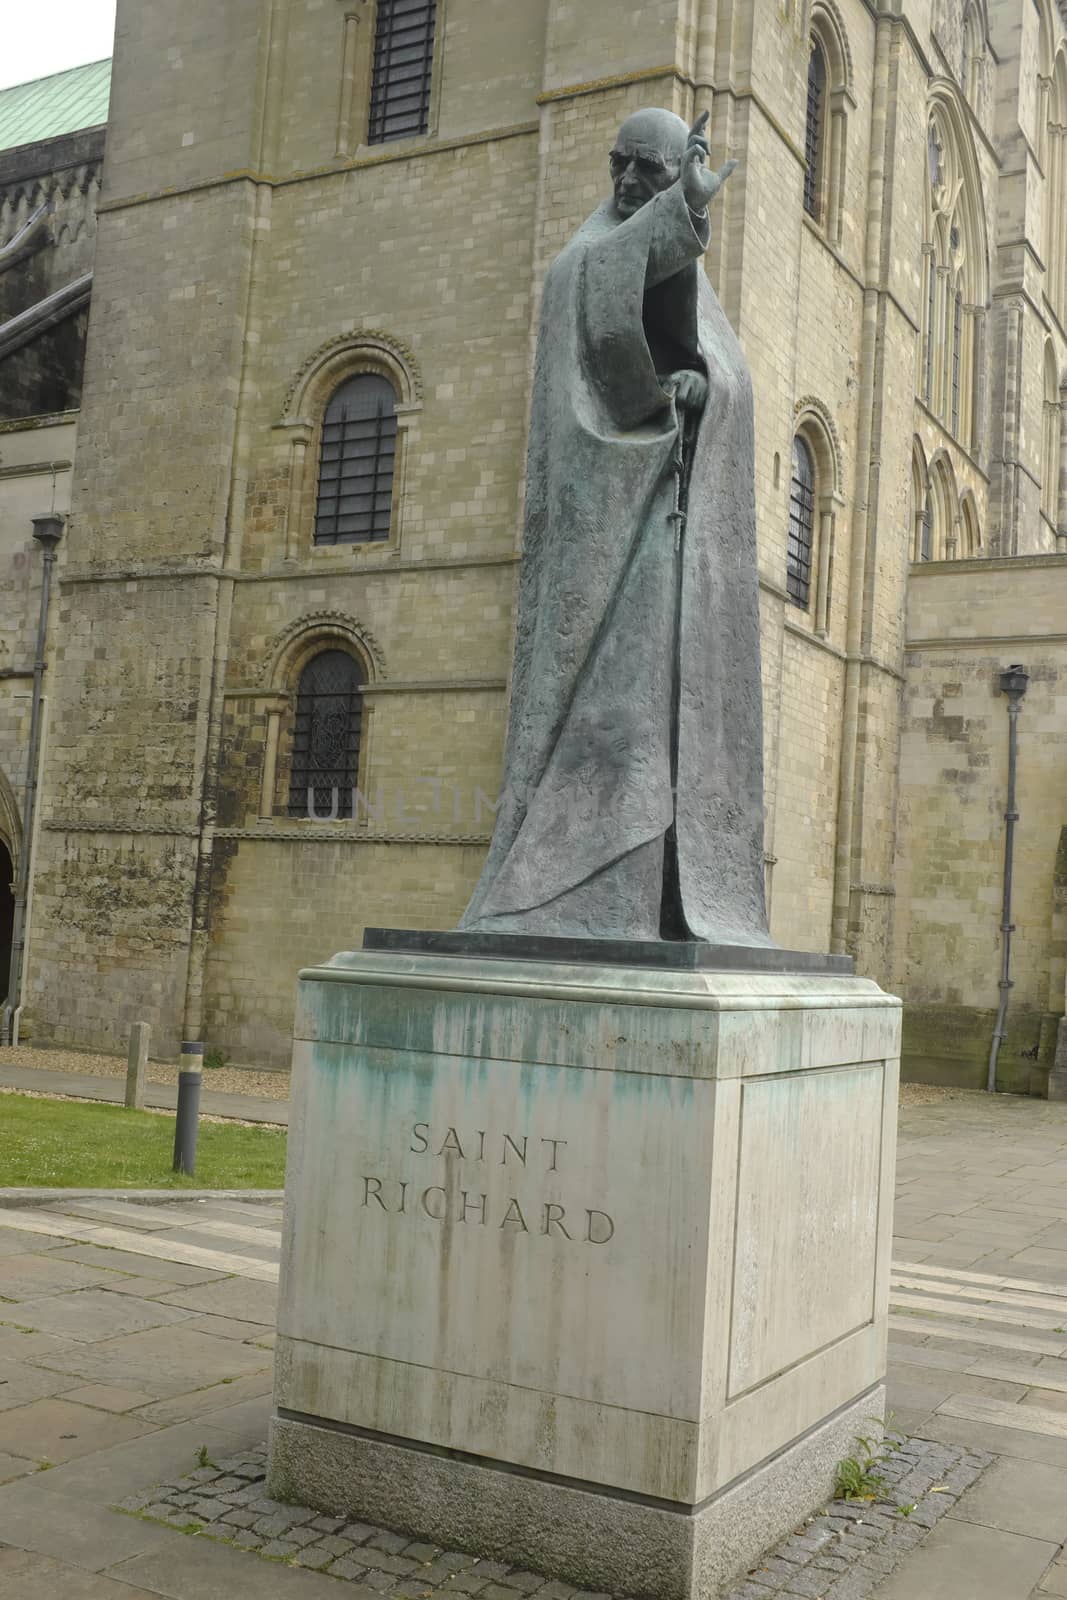 Statue of Saint Richard in the grounds of Chichester Cathedral,UK.